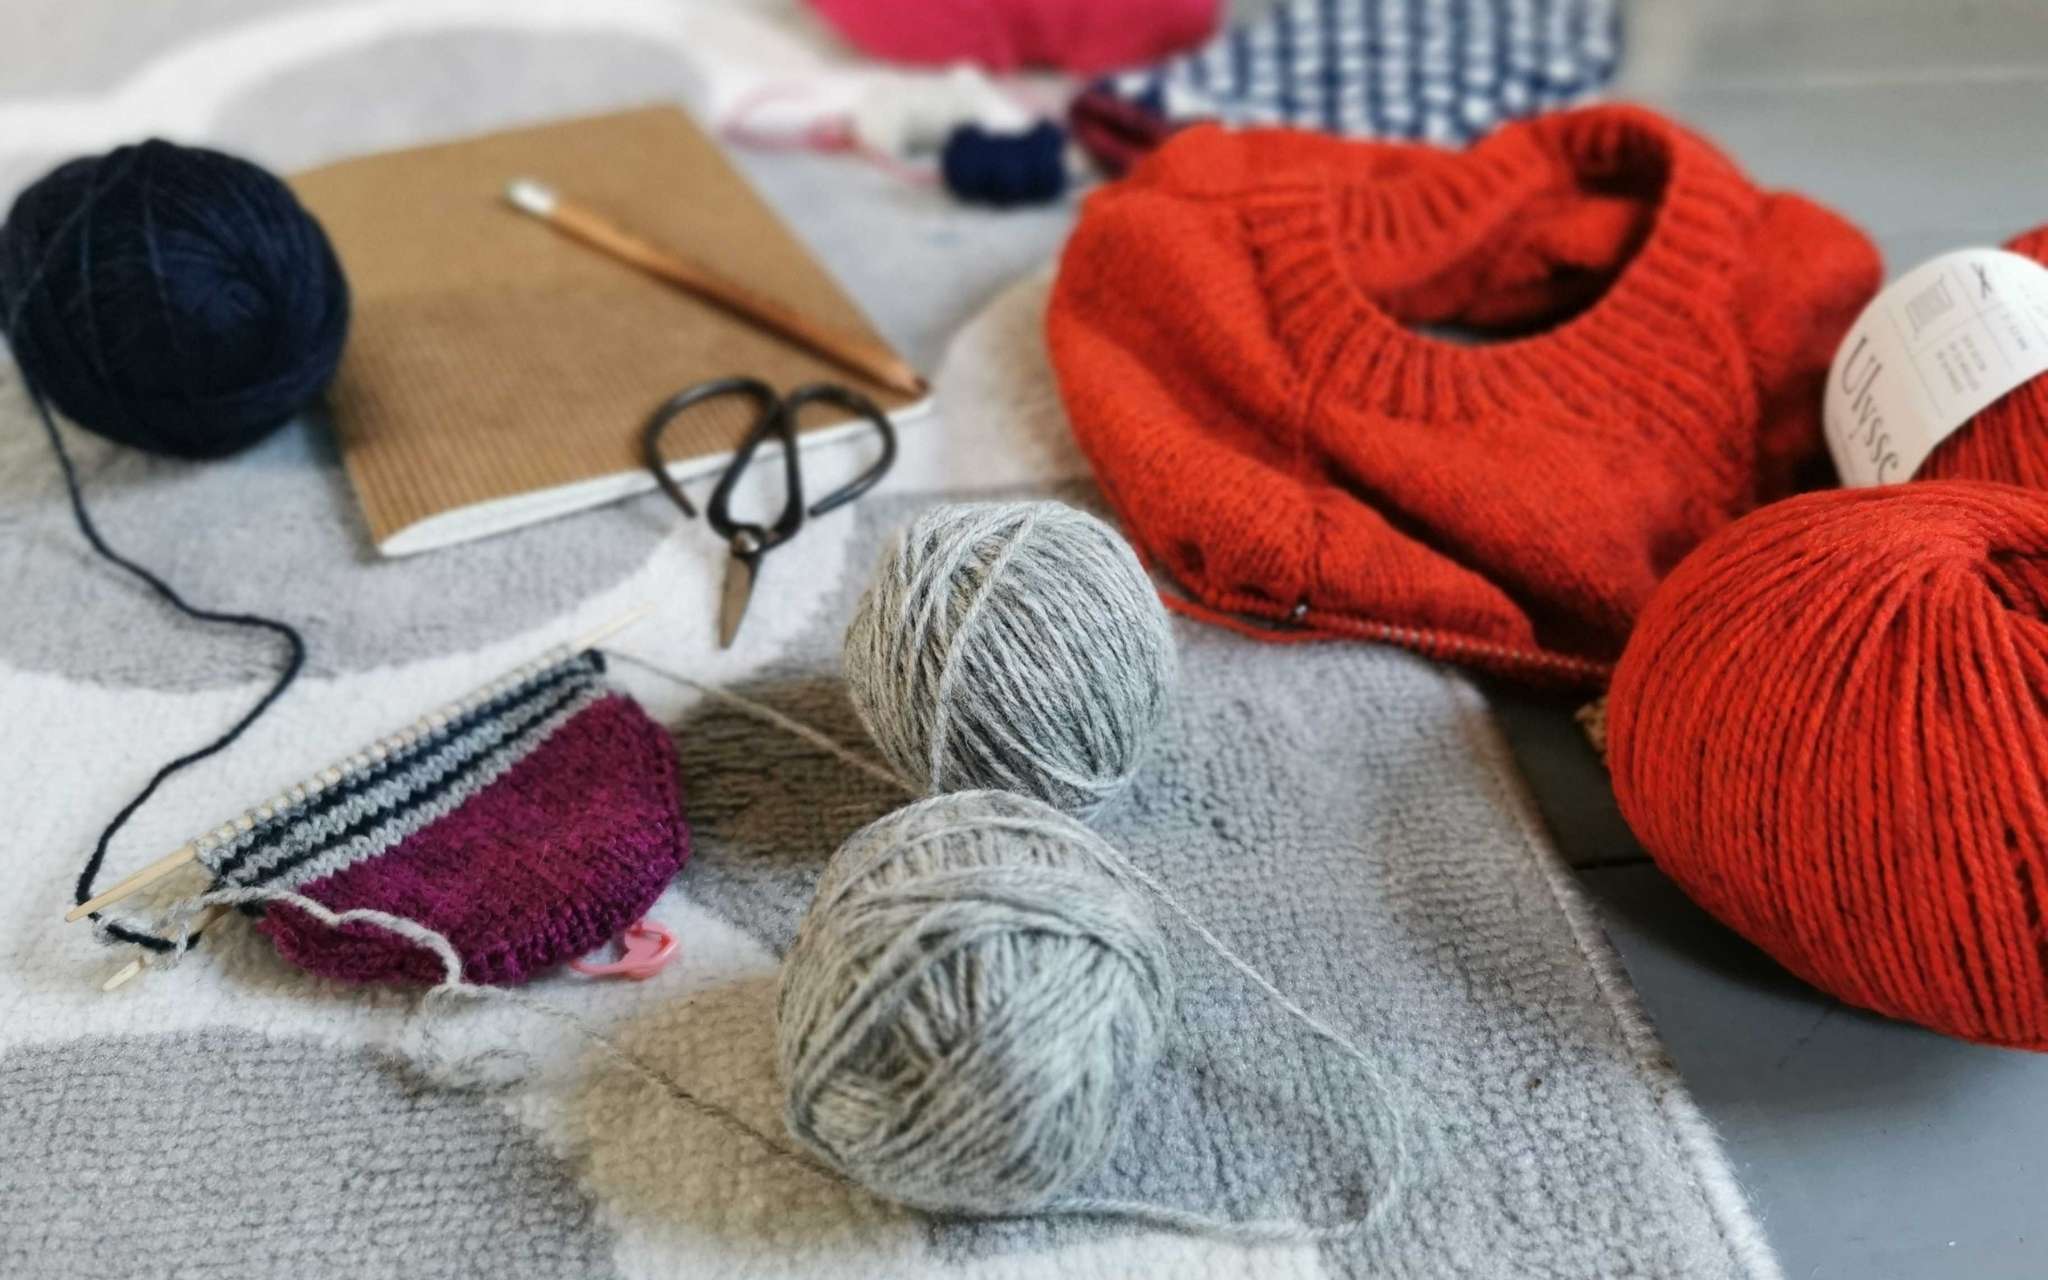 A pile of knitting projects on the needles including an orange sweater, striped socks next to a notebook and pencil.